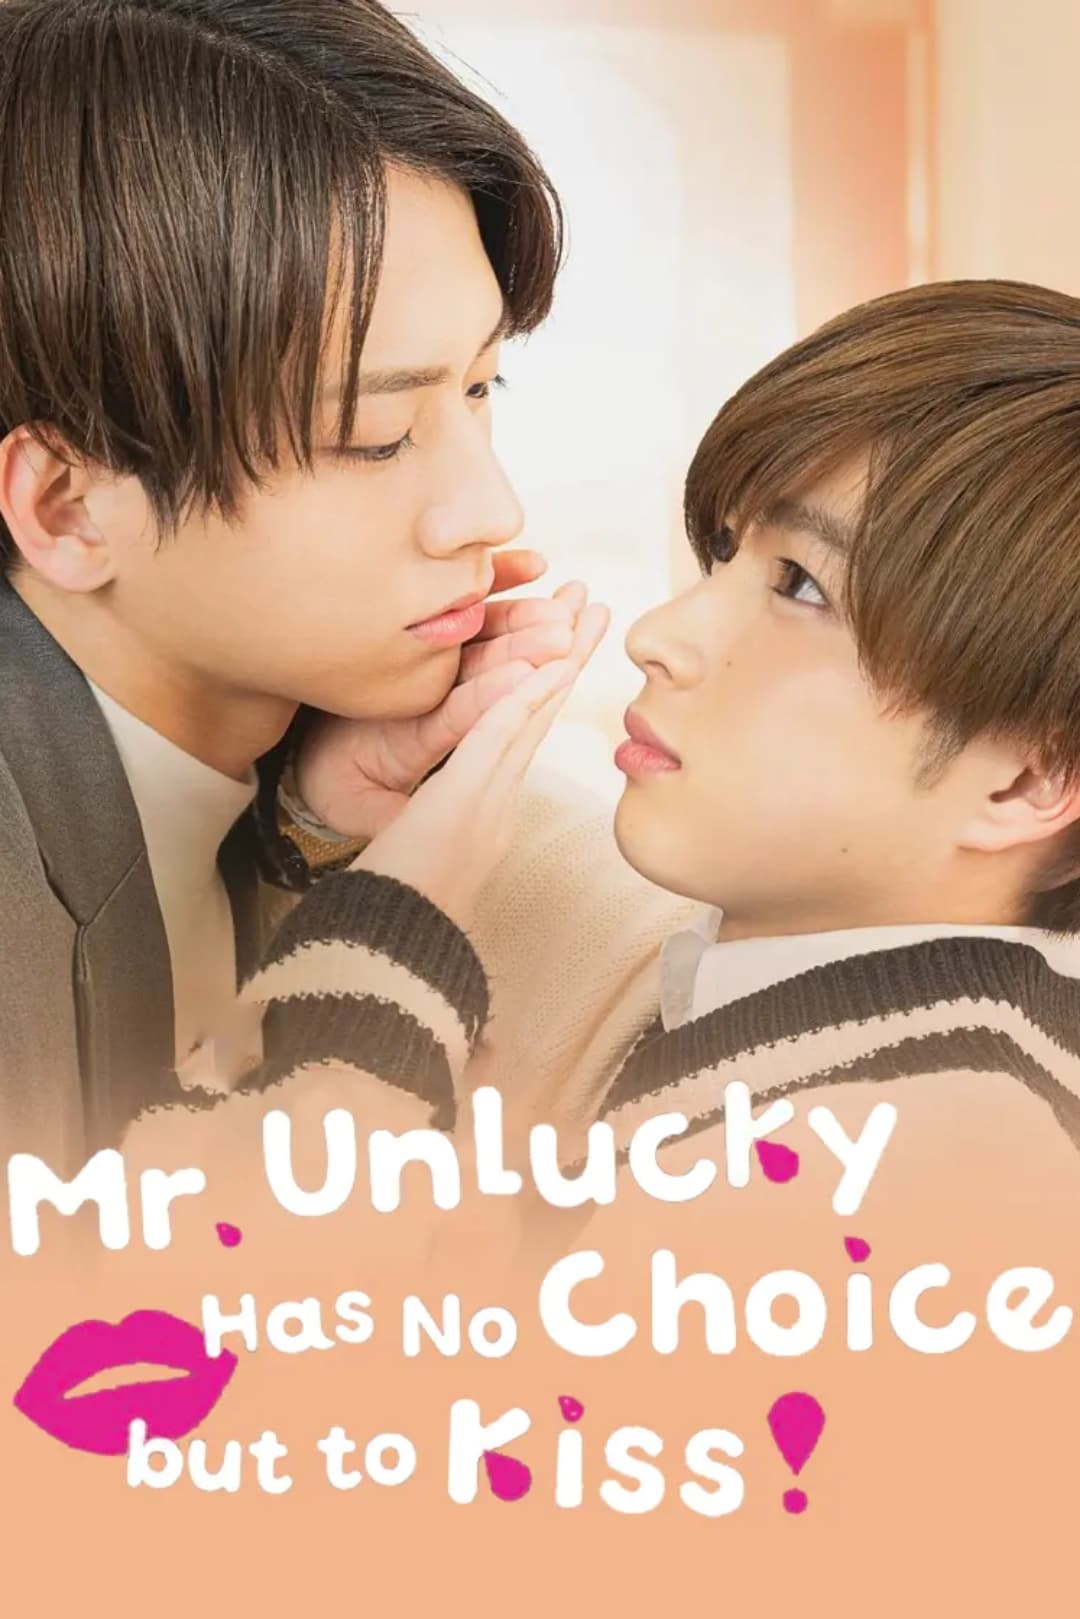 Mr. Unlucky Has No Choice but to Kiss!